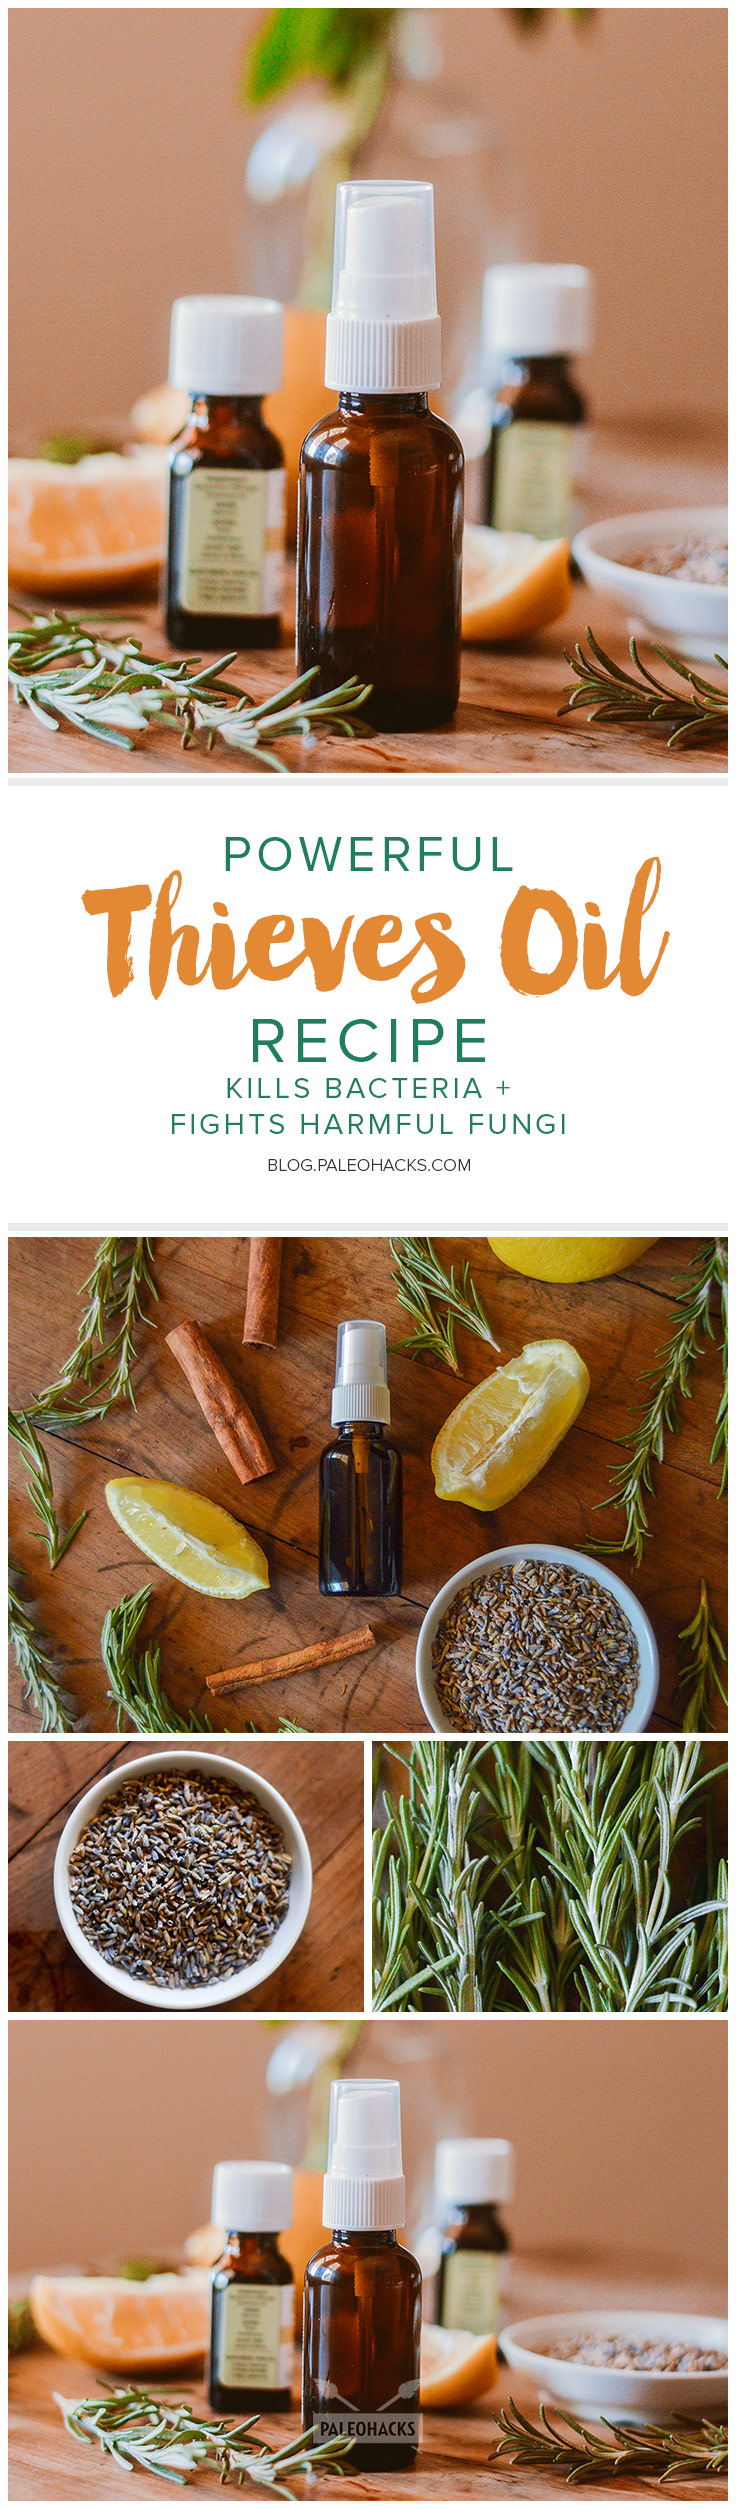 Ever hear of Thieves oil? Here’s the story behind this ancient oil - and how to concoct your own steal-worthy blend.